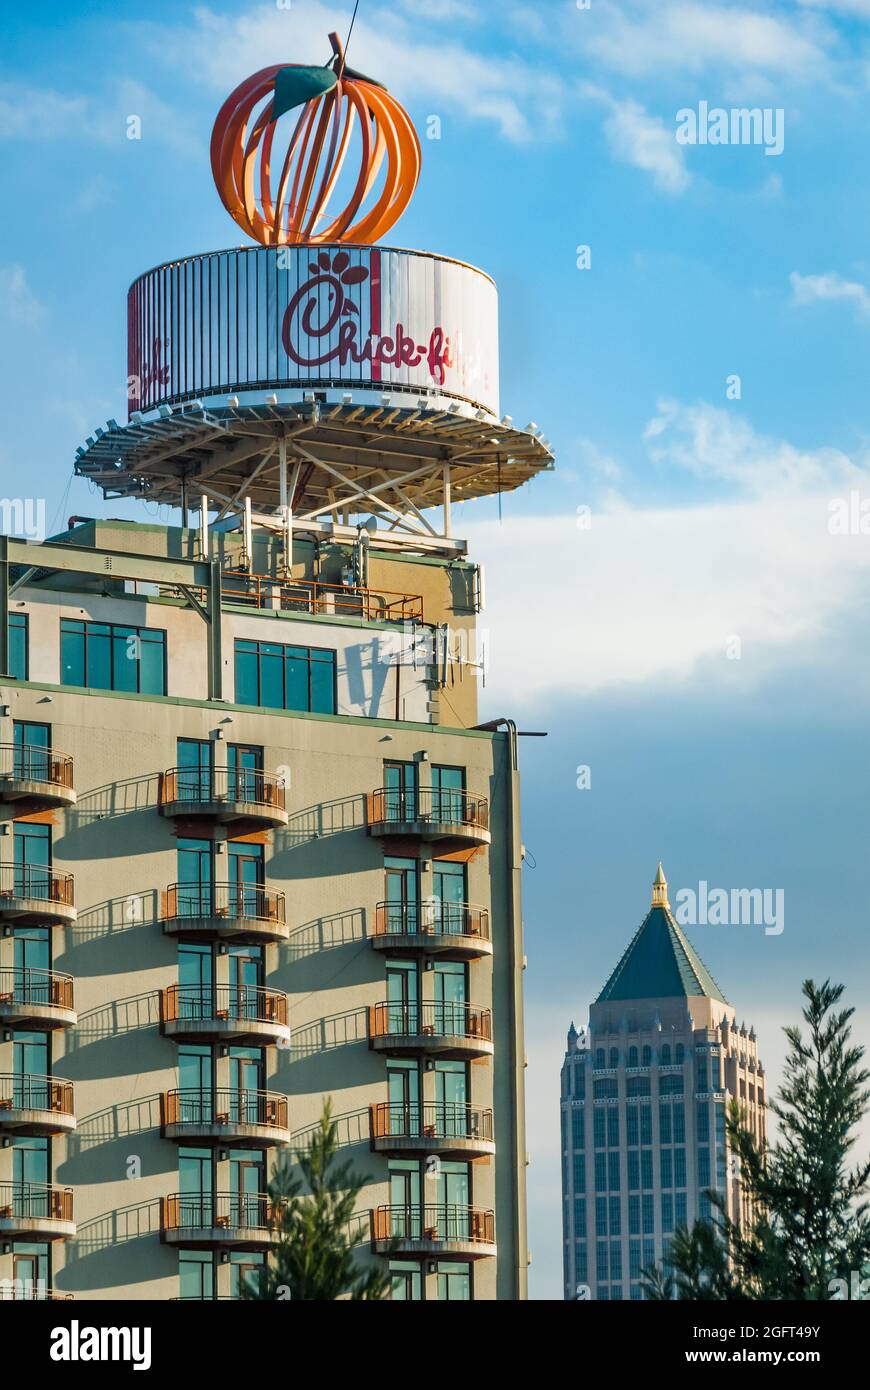 https://c8.alamy.com/comp/2GFT49Y/peach-sculpture-and-round-rotating-chick-fil-a-billboard-along-peachtree-street-and-i-85-in-midtown-atlanta-georgia-near-buckhead-usa-2GFT49Y.jpg